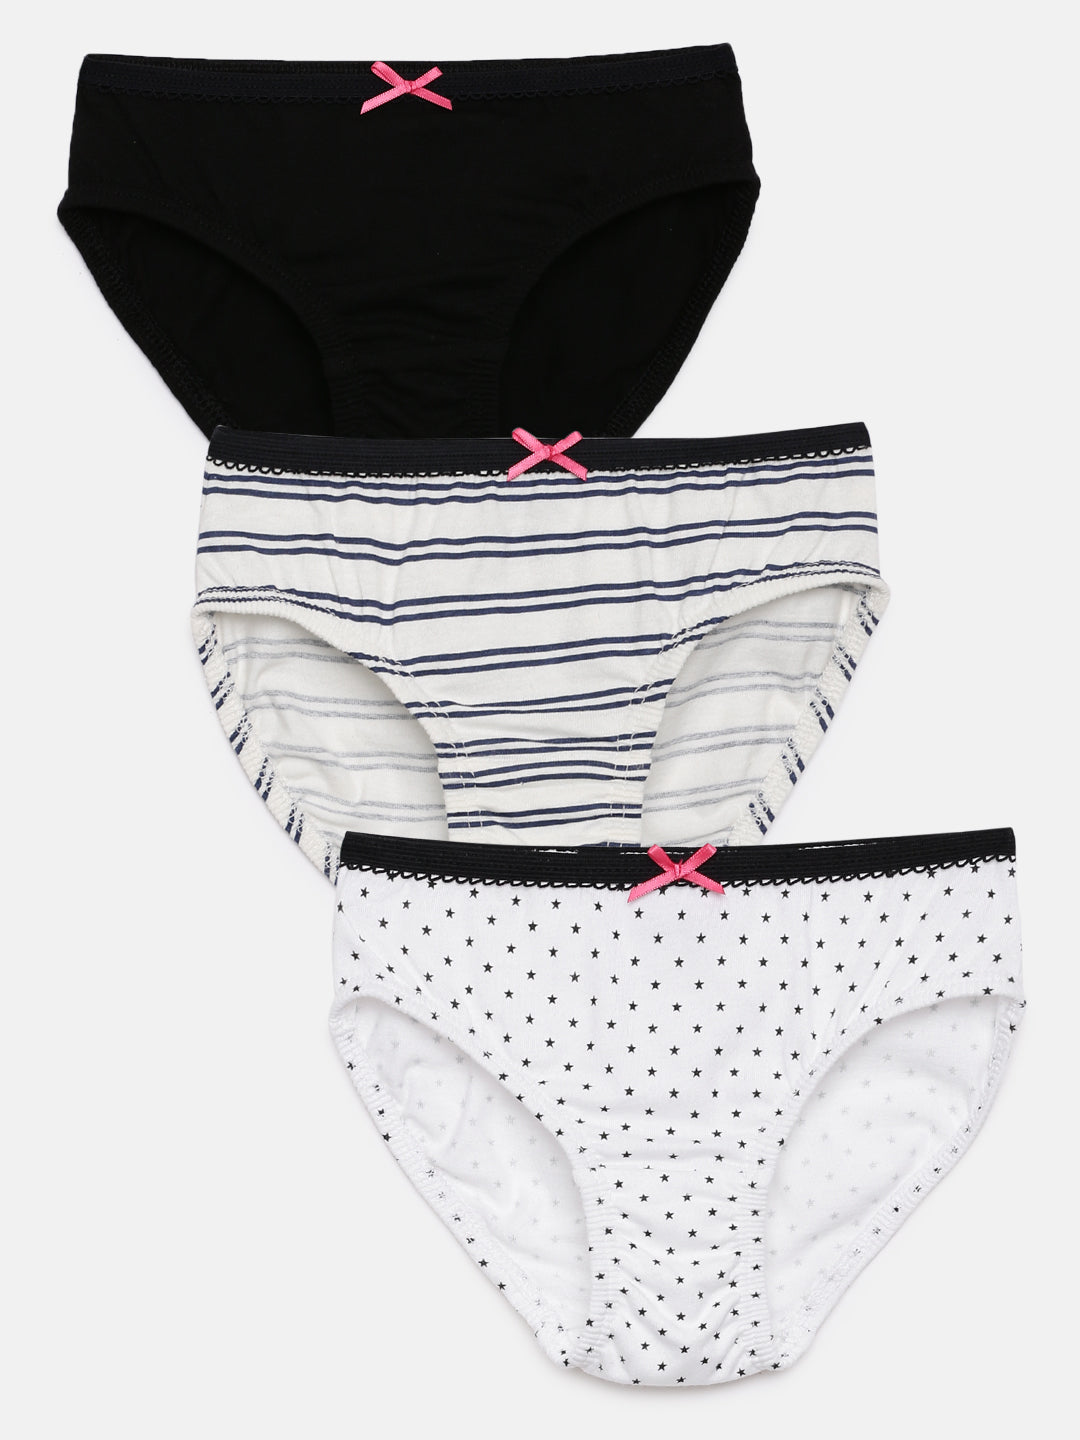 Buy Girl's brief pack of 3 from mackly 